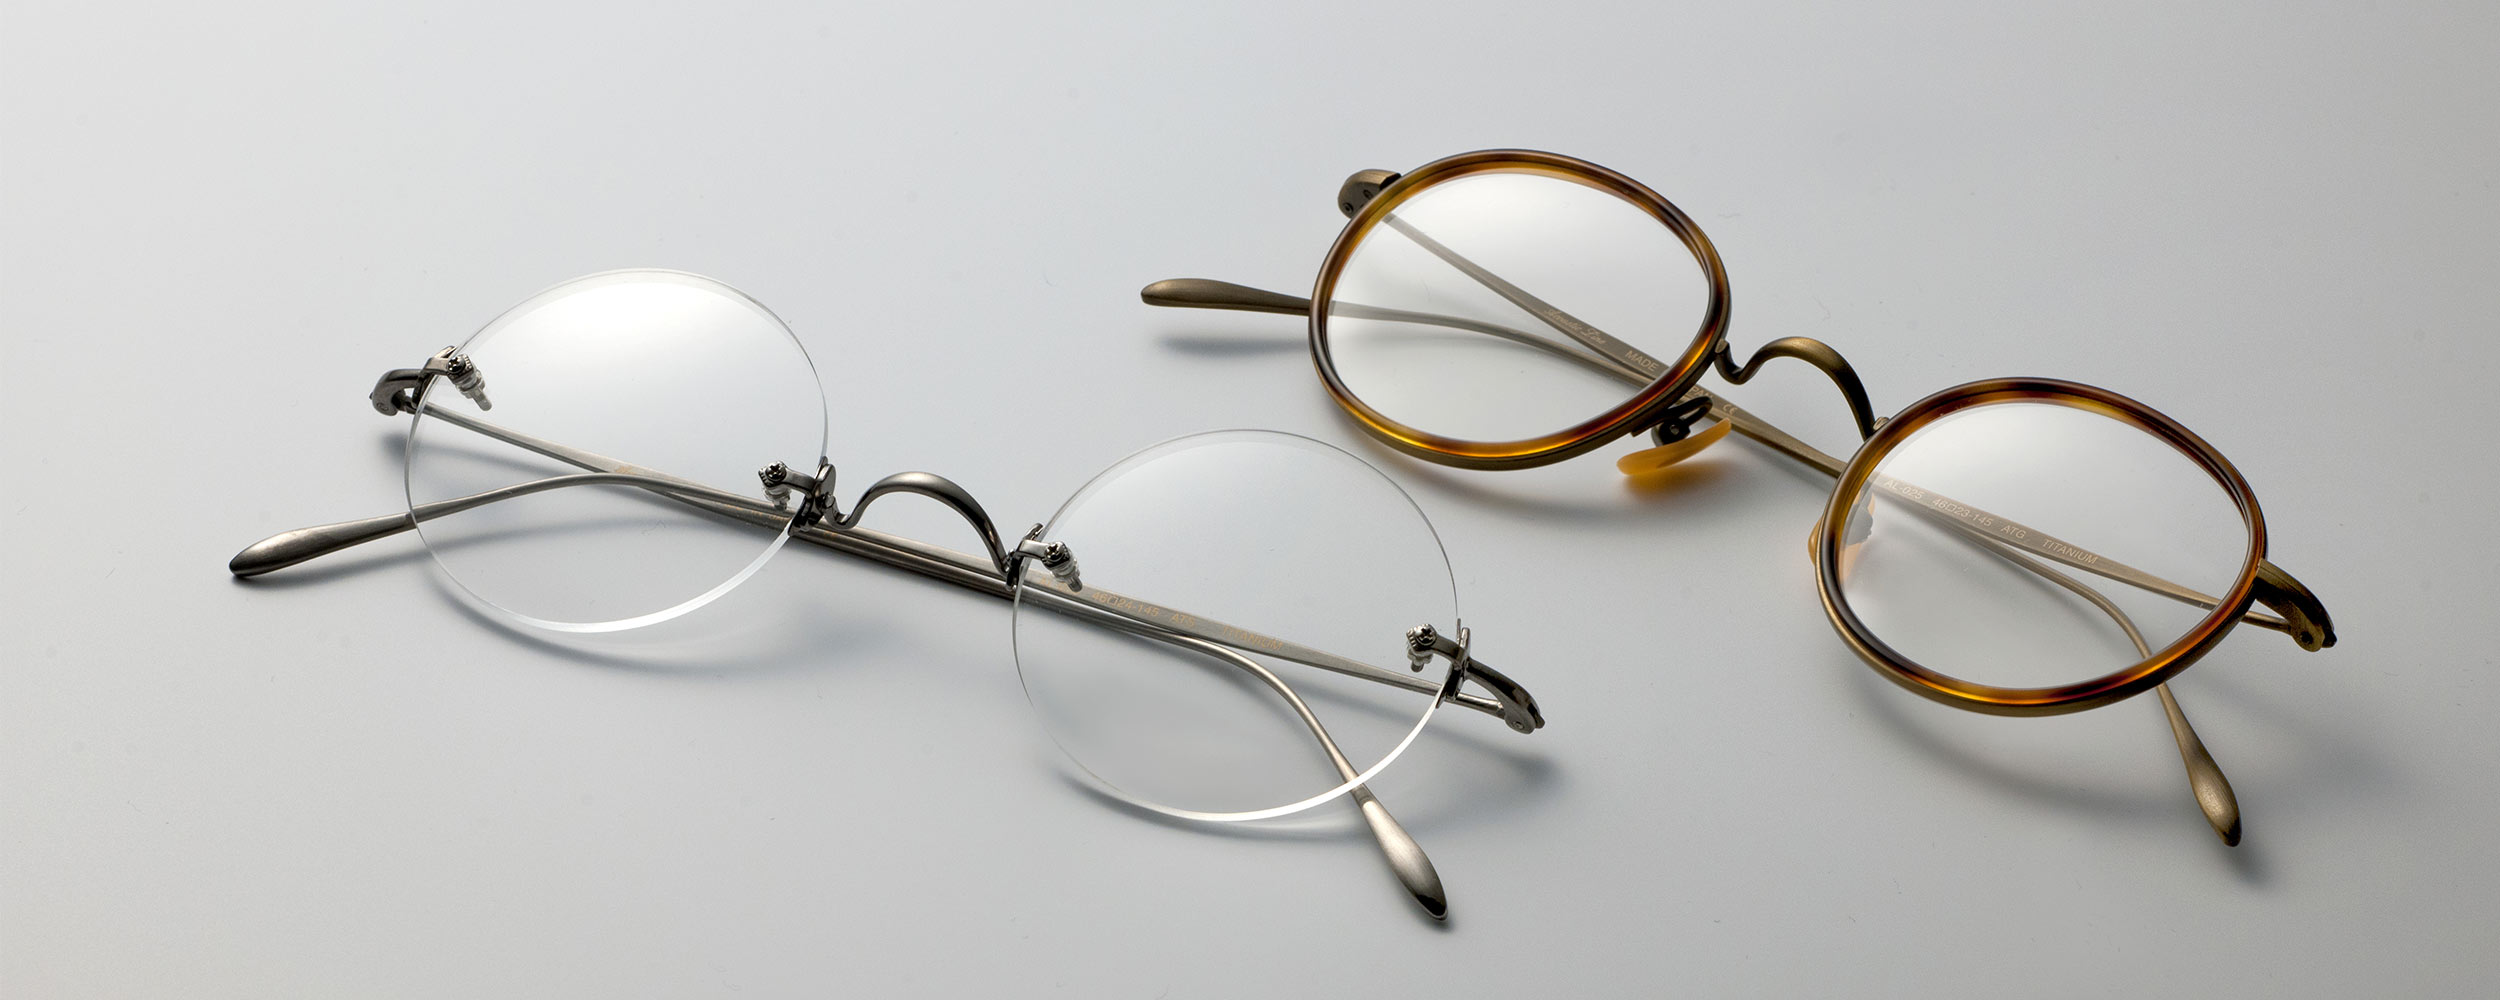 Acoustic Line - Made in Sabae, Made in Japan. Acoustic Line is high quarity Eyewear Brand. Please check it up!